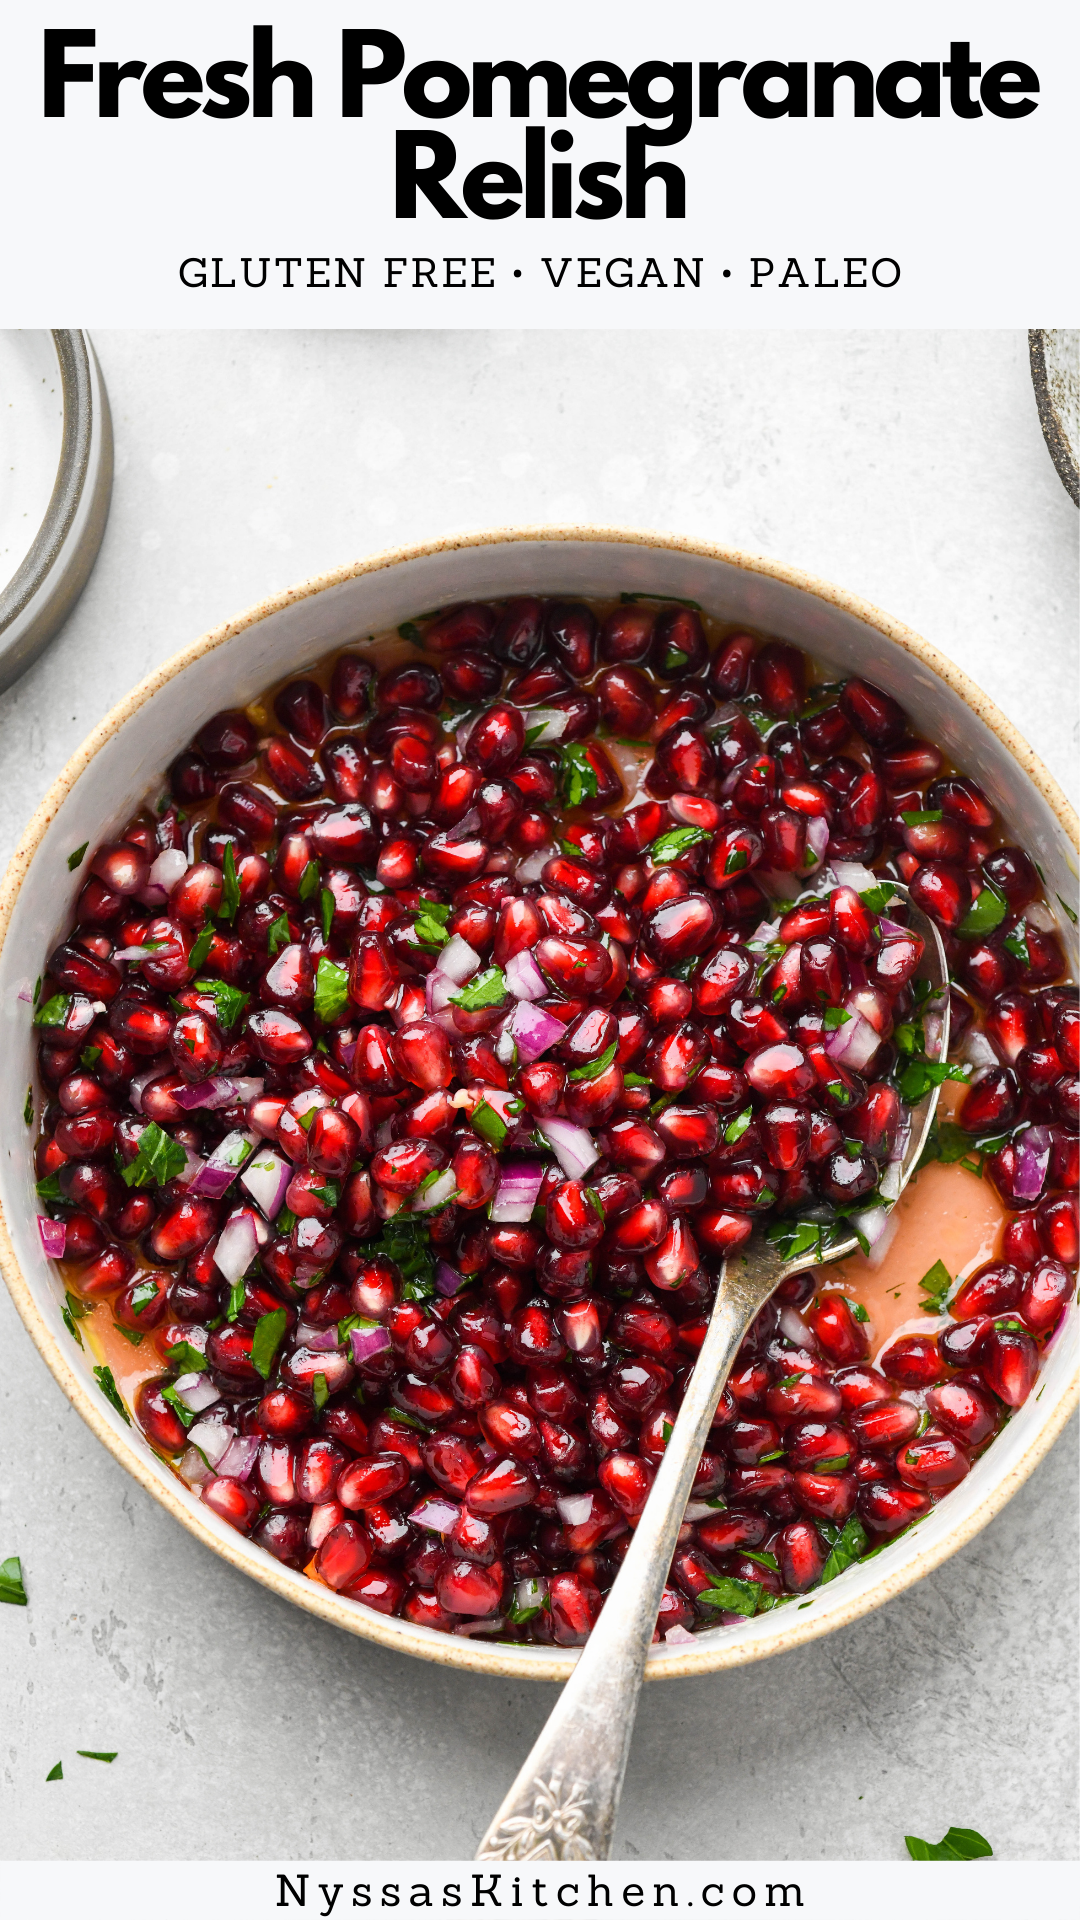 Fresh pomegranate relish is a bright and flavorful condiment that can be served with chicken, turkey, fish, or salad. A delightfully tart and juicy twist on classic cranberry relish that would be perfect for Thanksgiving dinner! Vegan, gluten free, paleo.